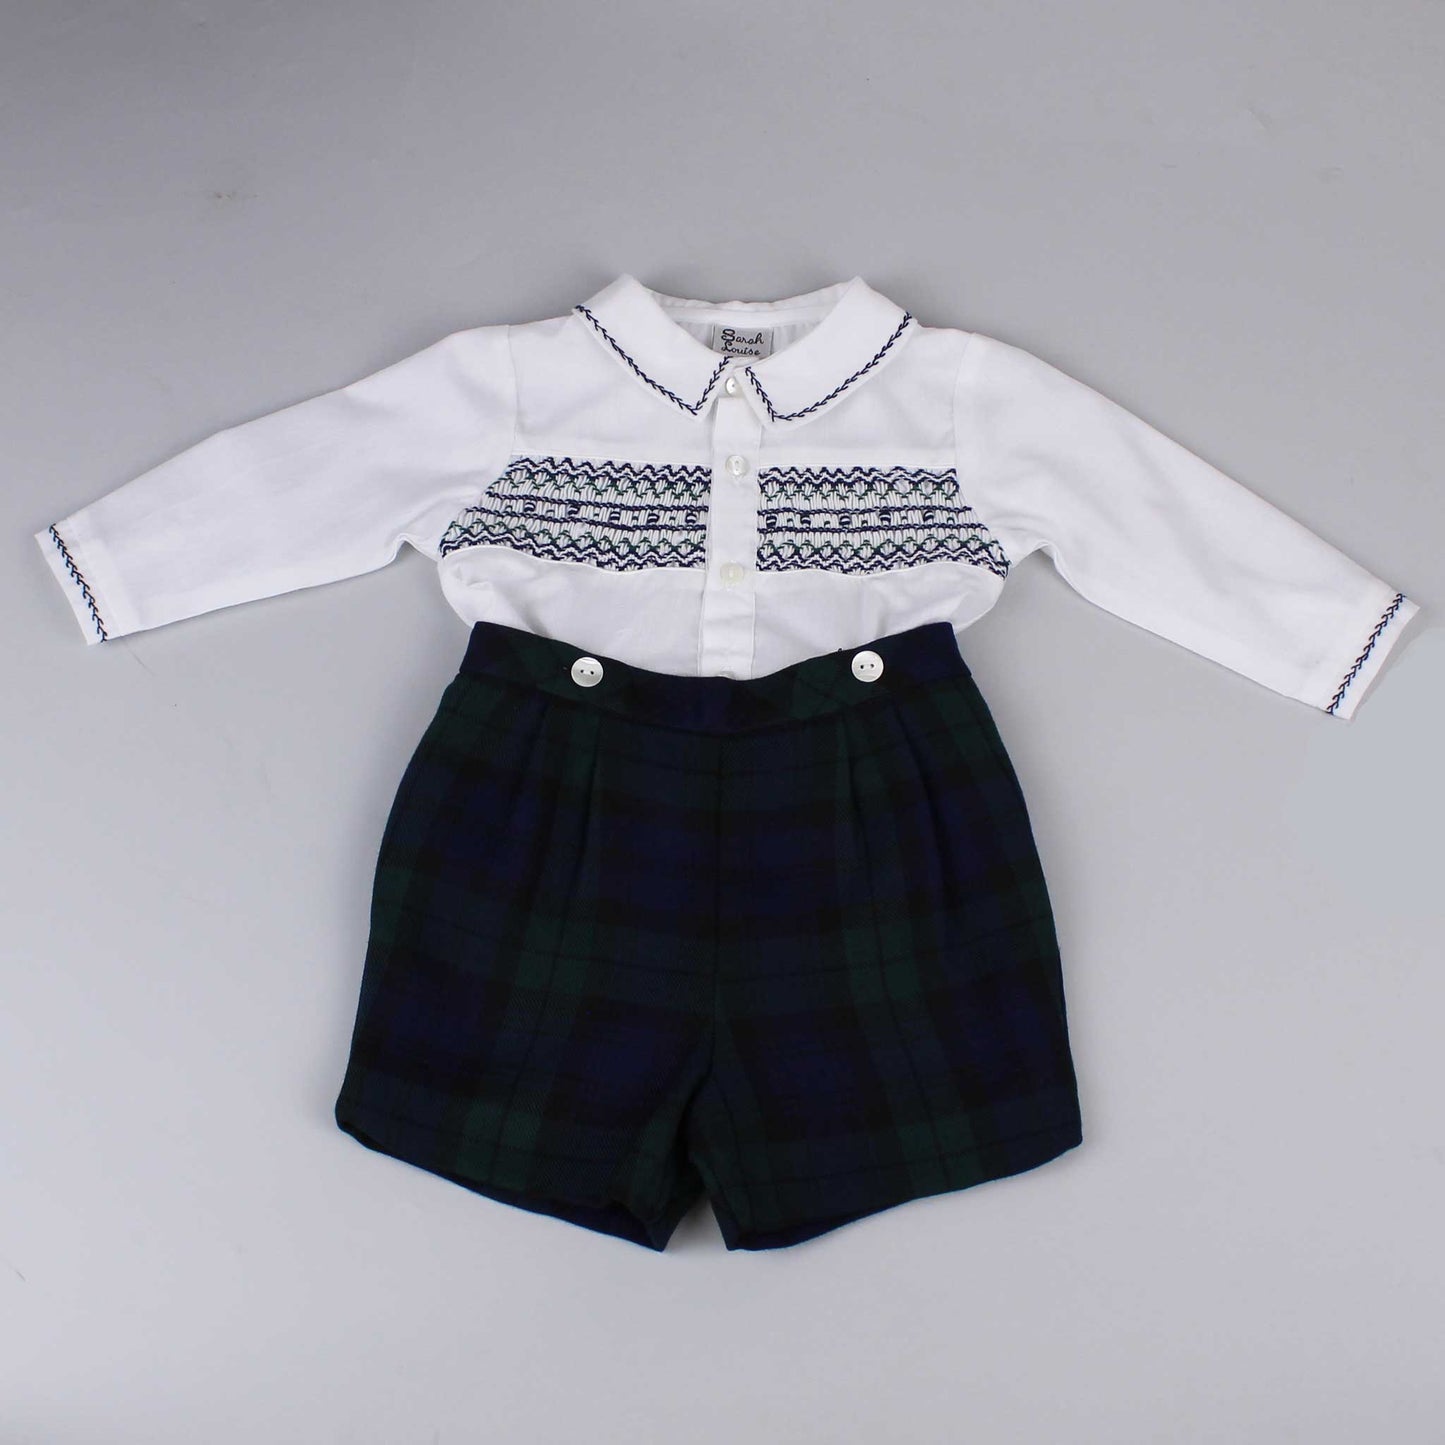 Baby Boys 2 Piece Tartan Shorts and Shirt Outfit